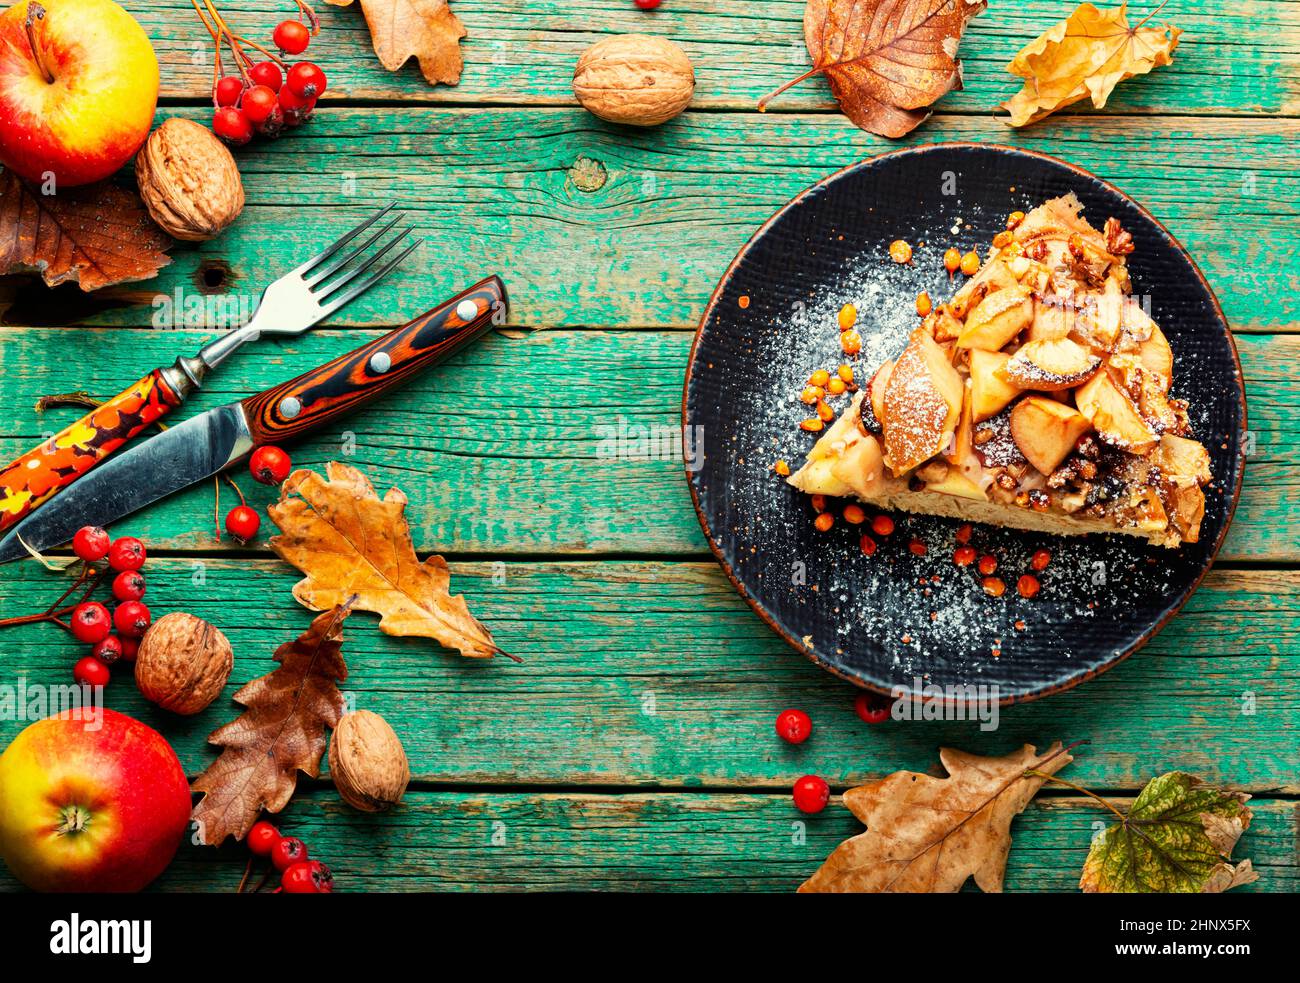 Autumn pie with apples, nuts and sea buckthorn. Charlotte on kefir. Stock Photo